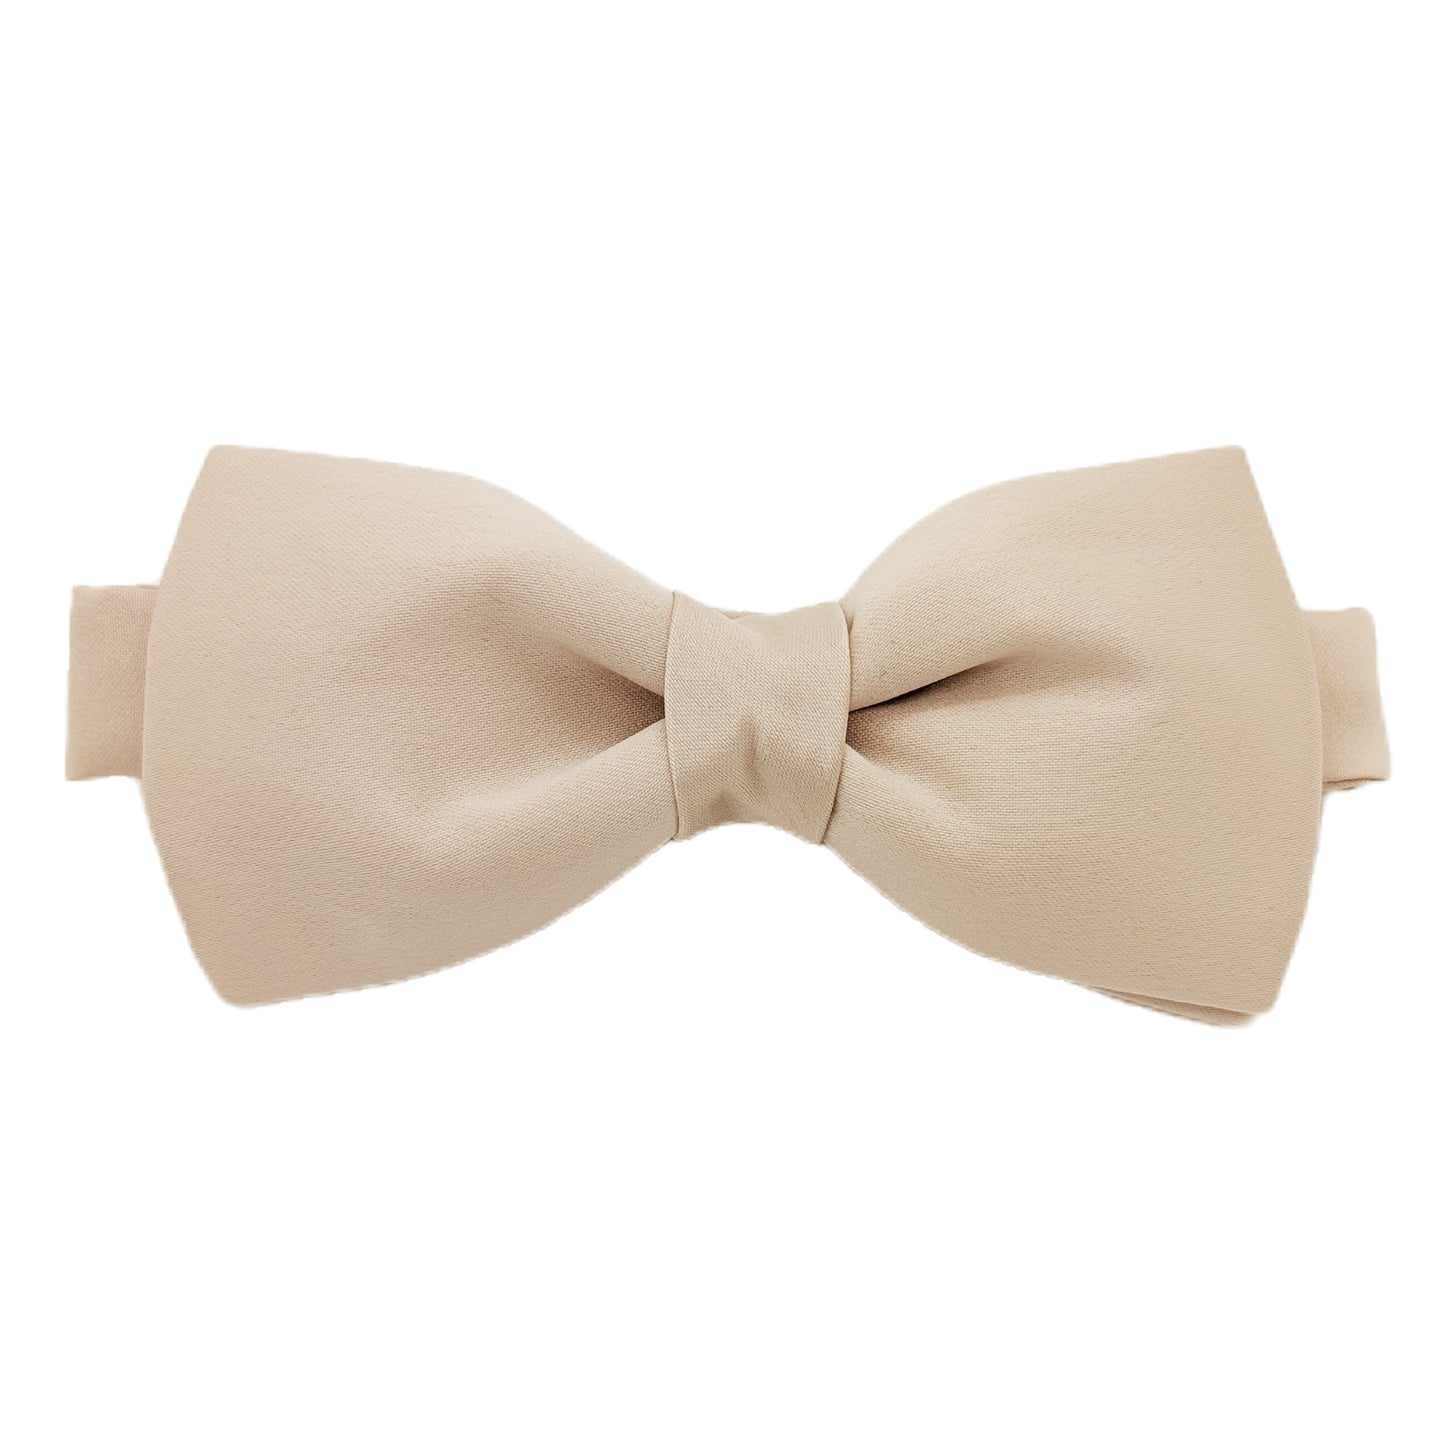 Antique Champagne Bow Ties